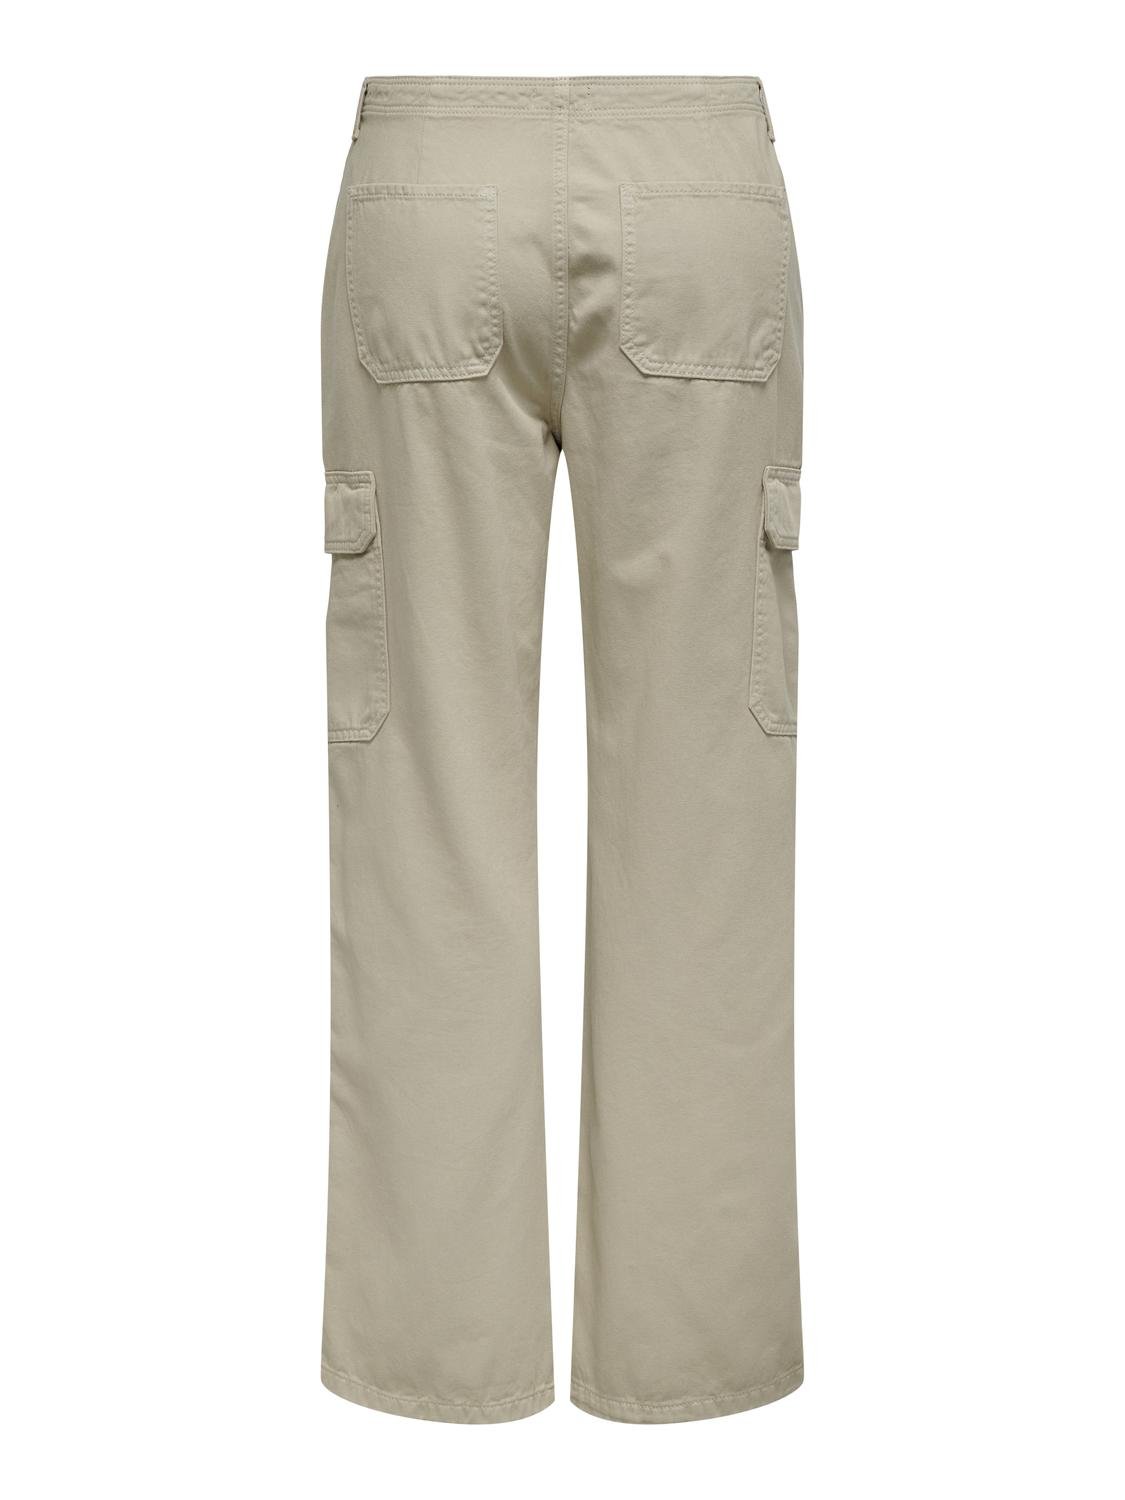 ONLY cargo pants with high waist -Silver Lining - 15300976